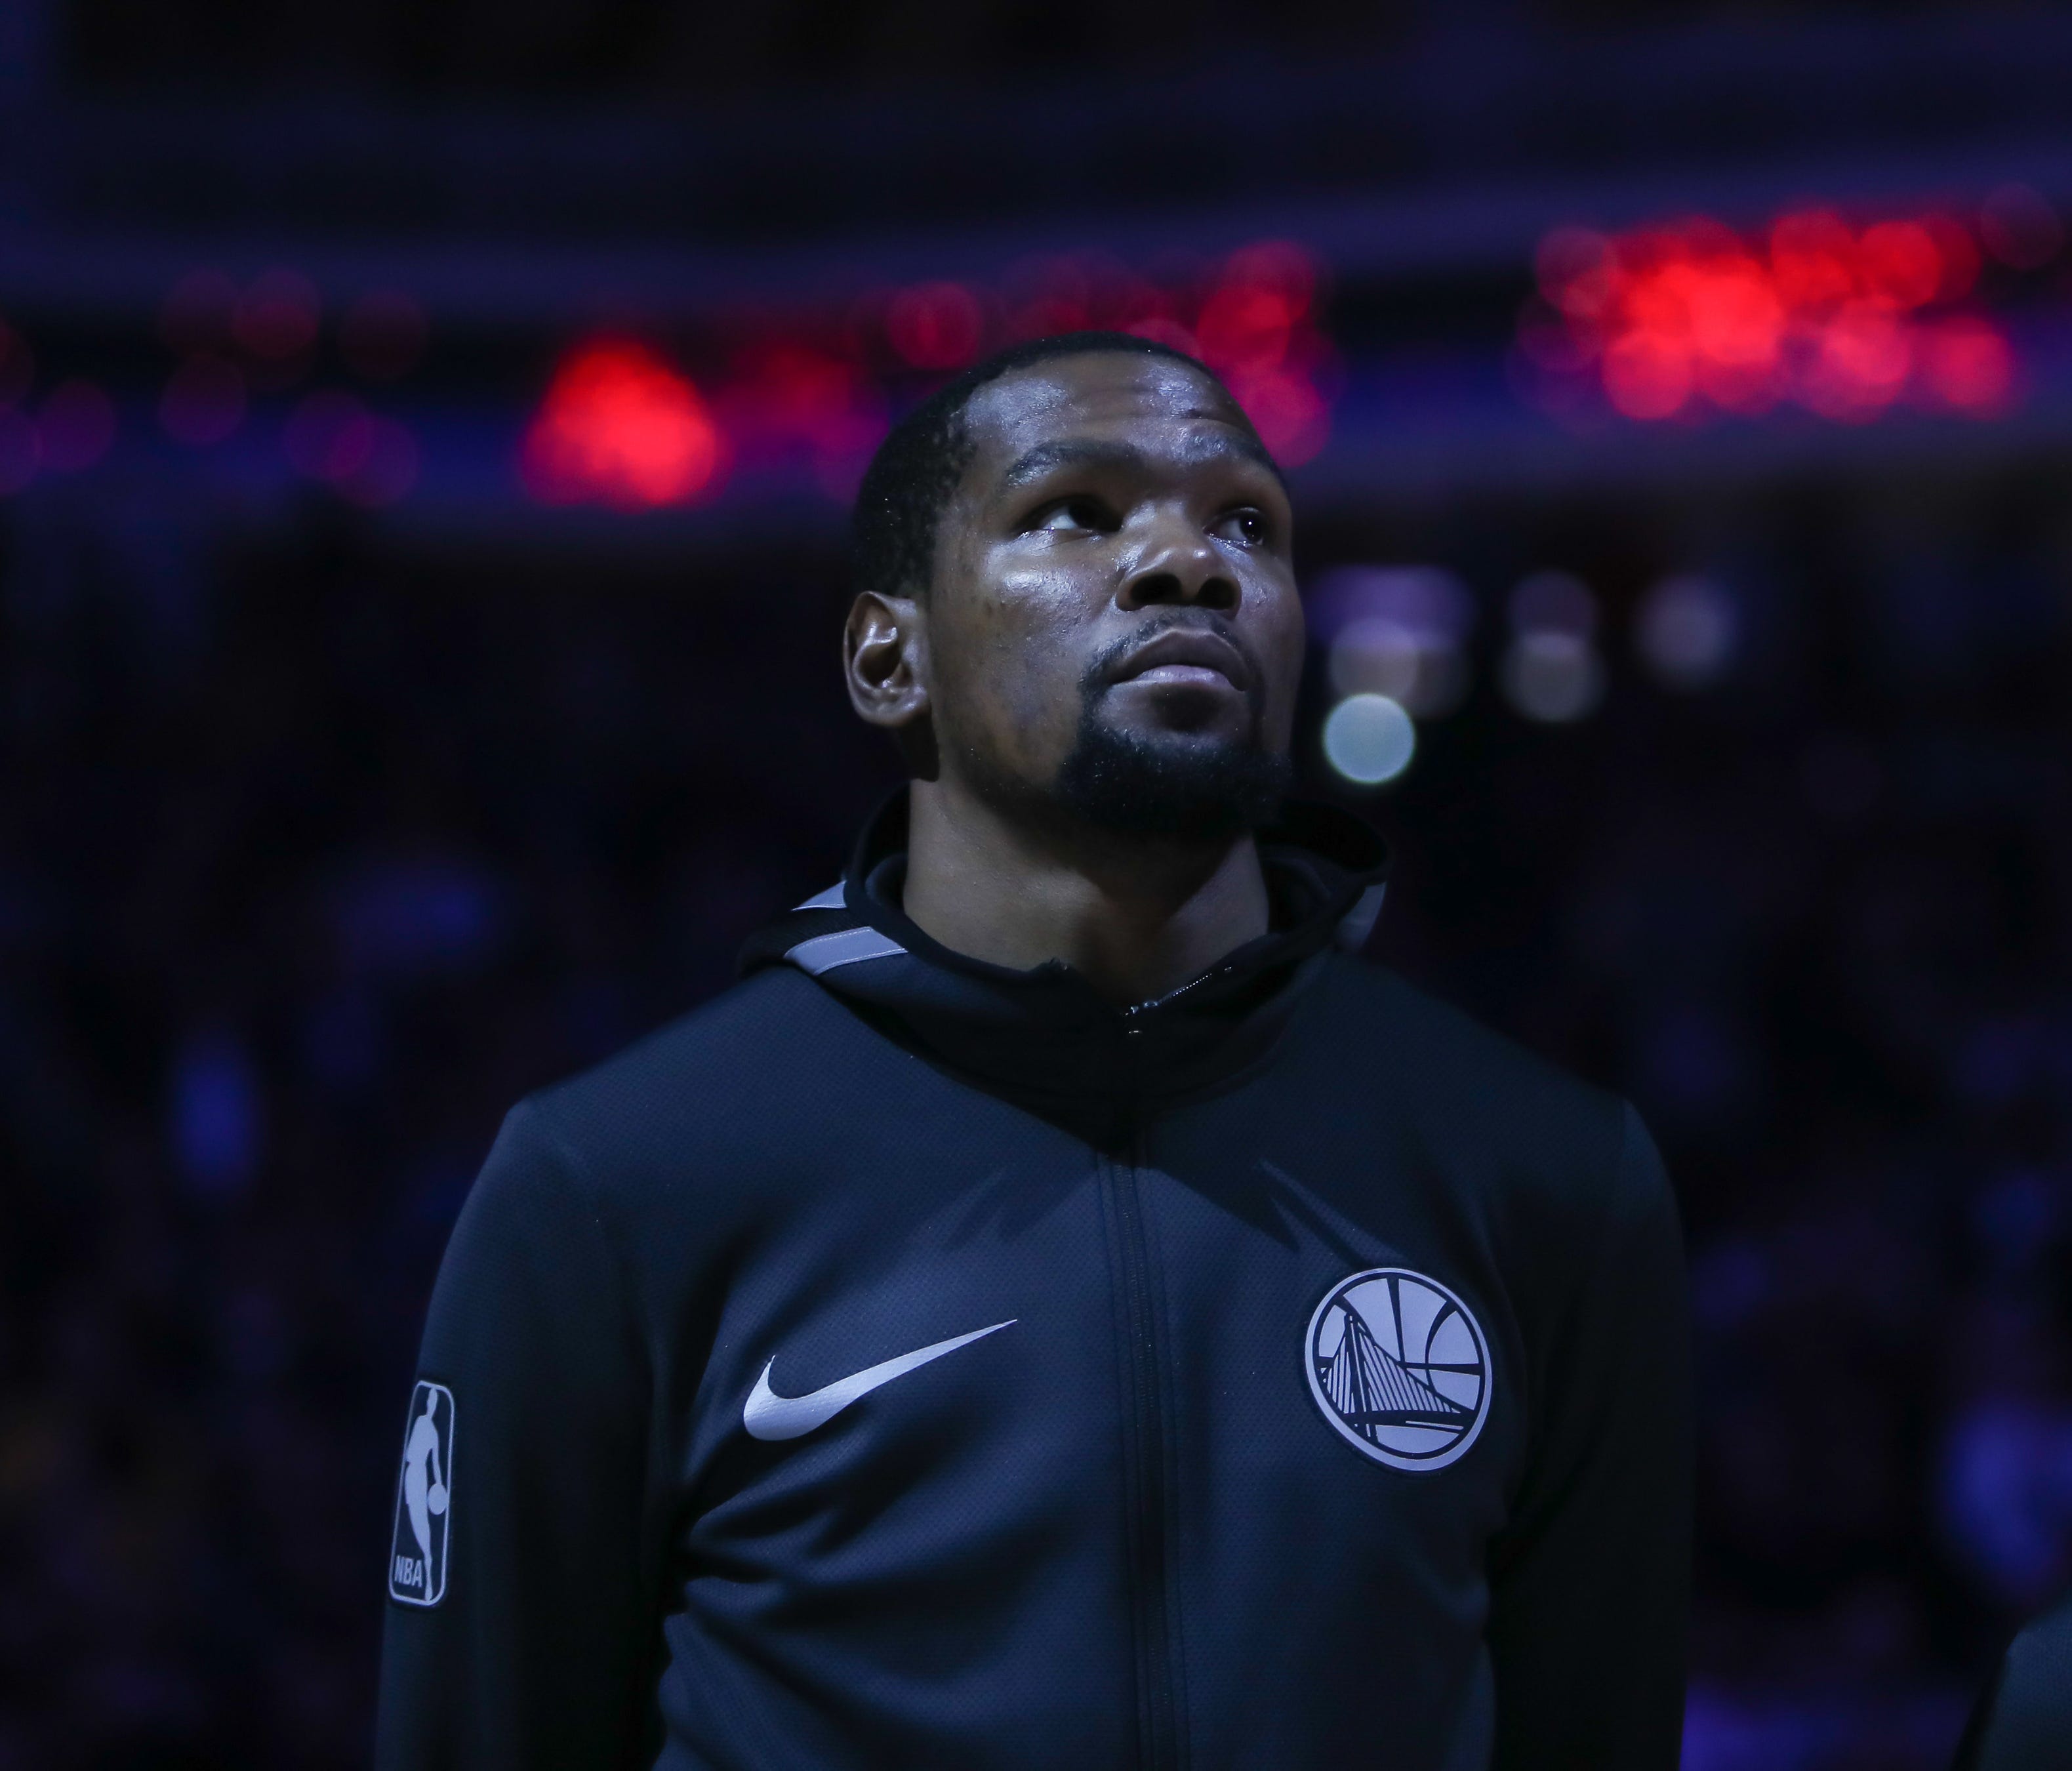 Golden State Warriors forward Kevin Durant before the game against the Sacramento Kings at Golden 1 Center.